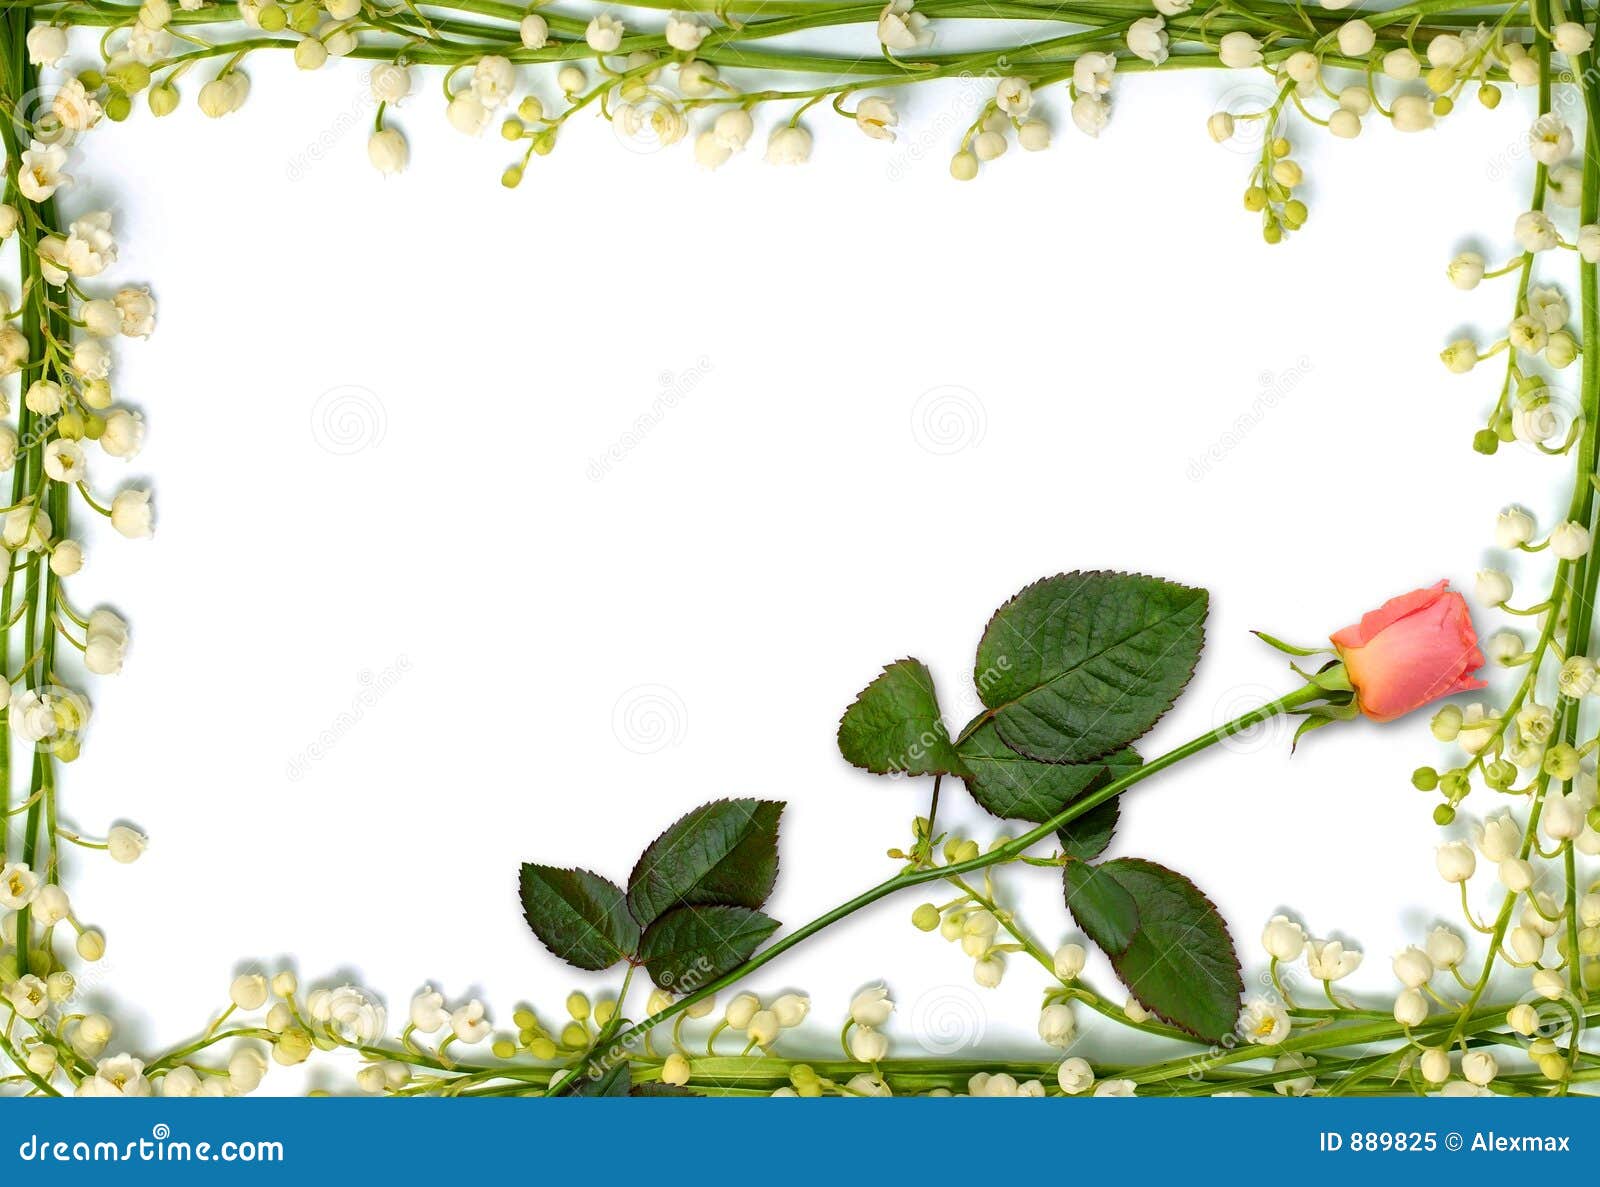 Beautiful Flower Frame with Pink Rose Background Stock Image ...